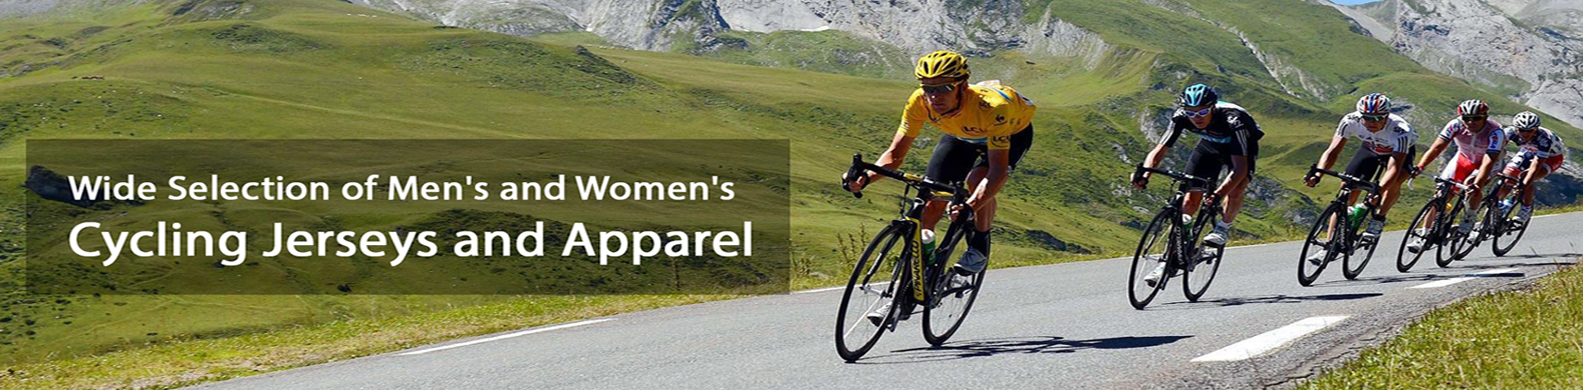 Wide Selection of Men's and Women's Cycling Jerseys and Apparel